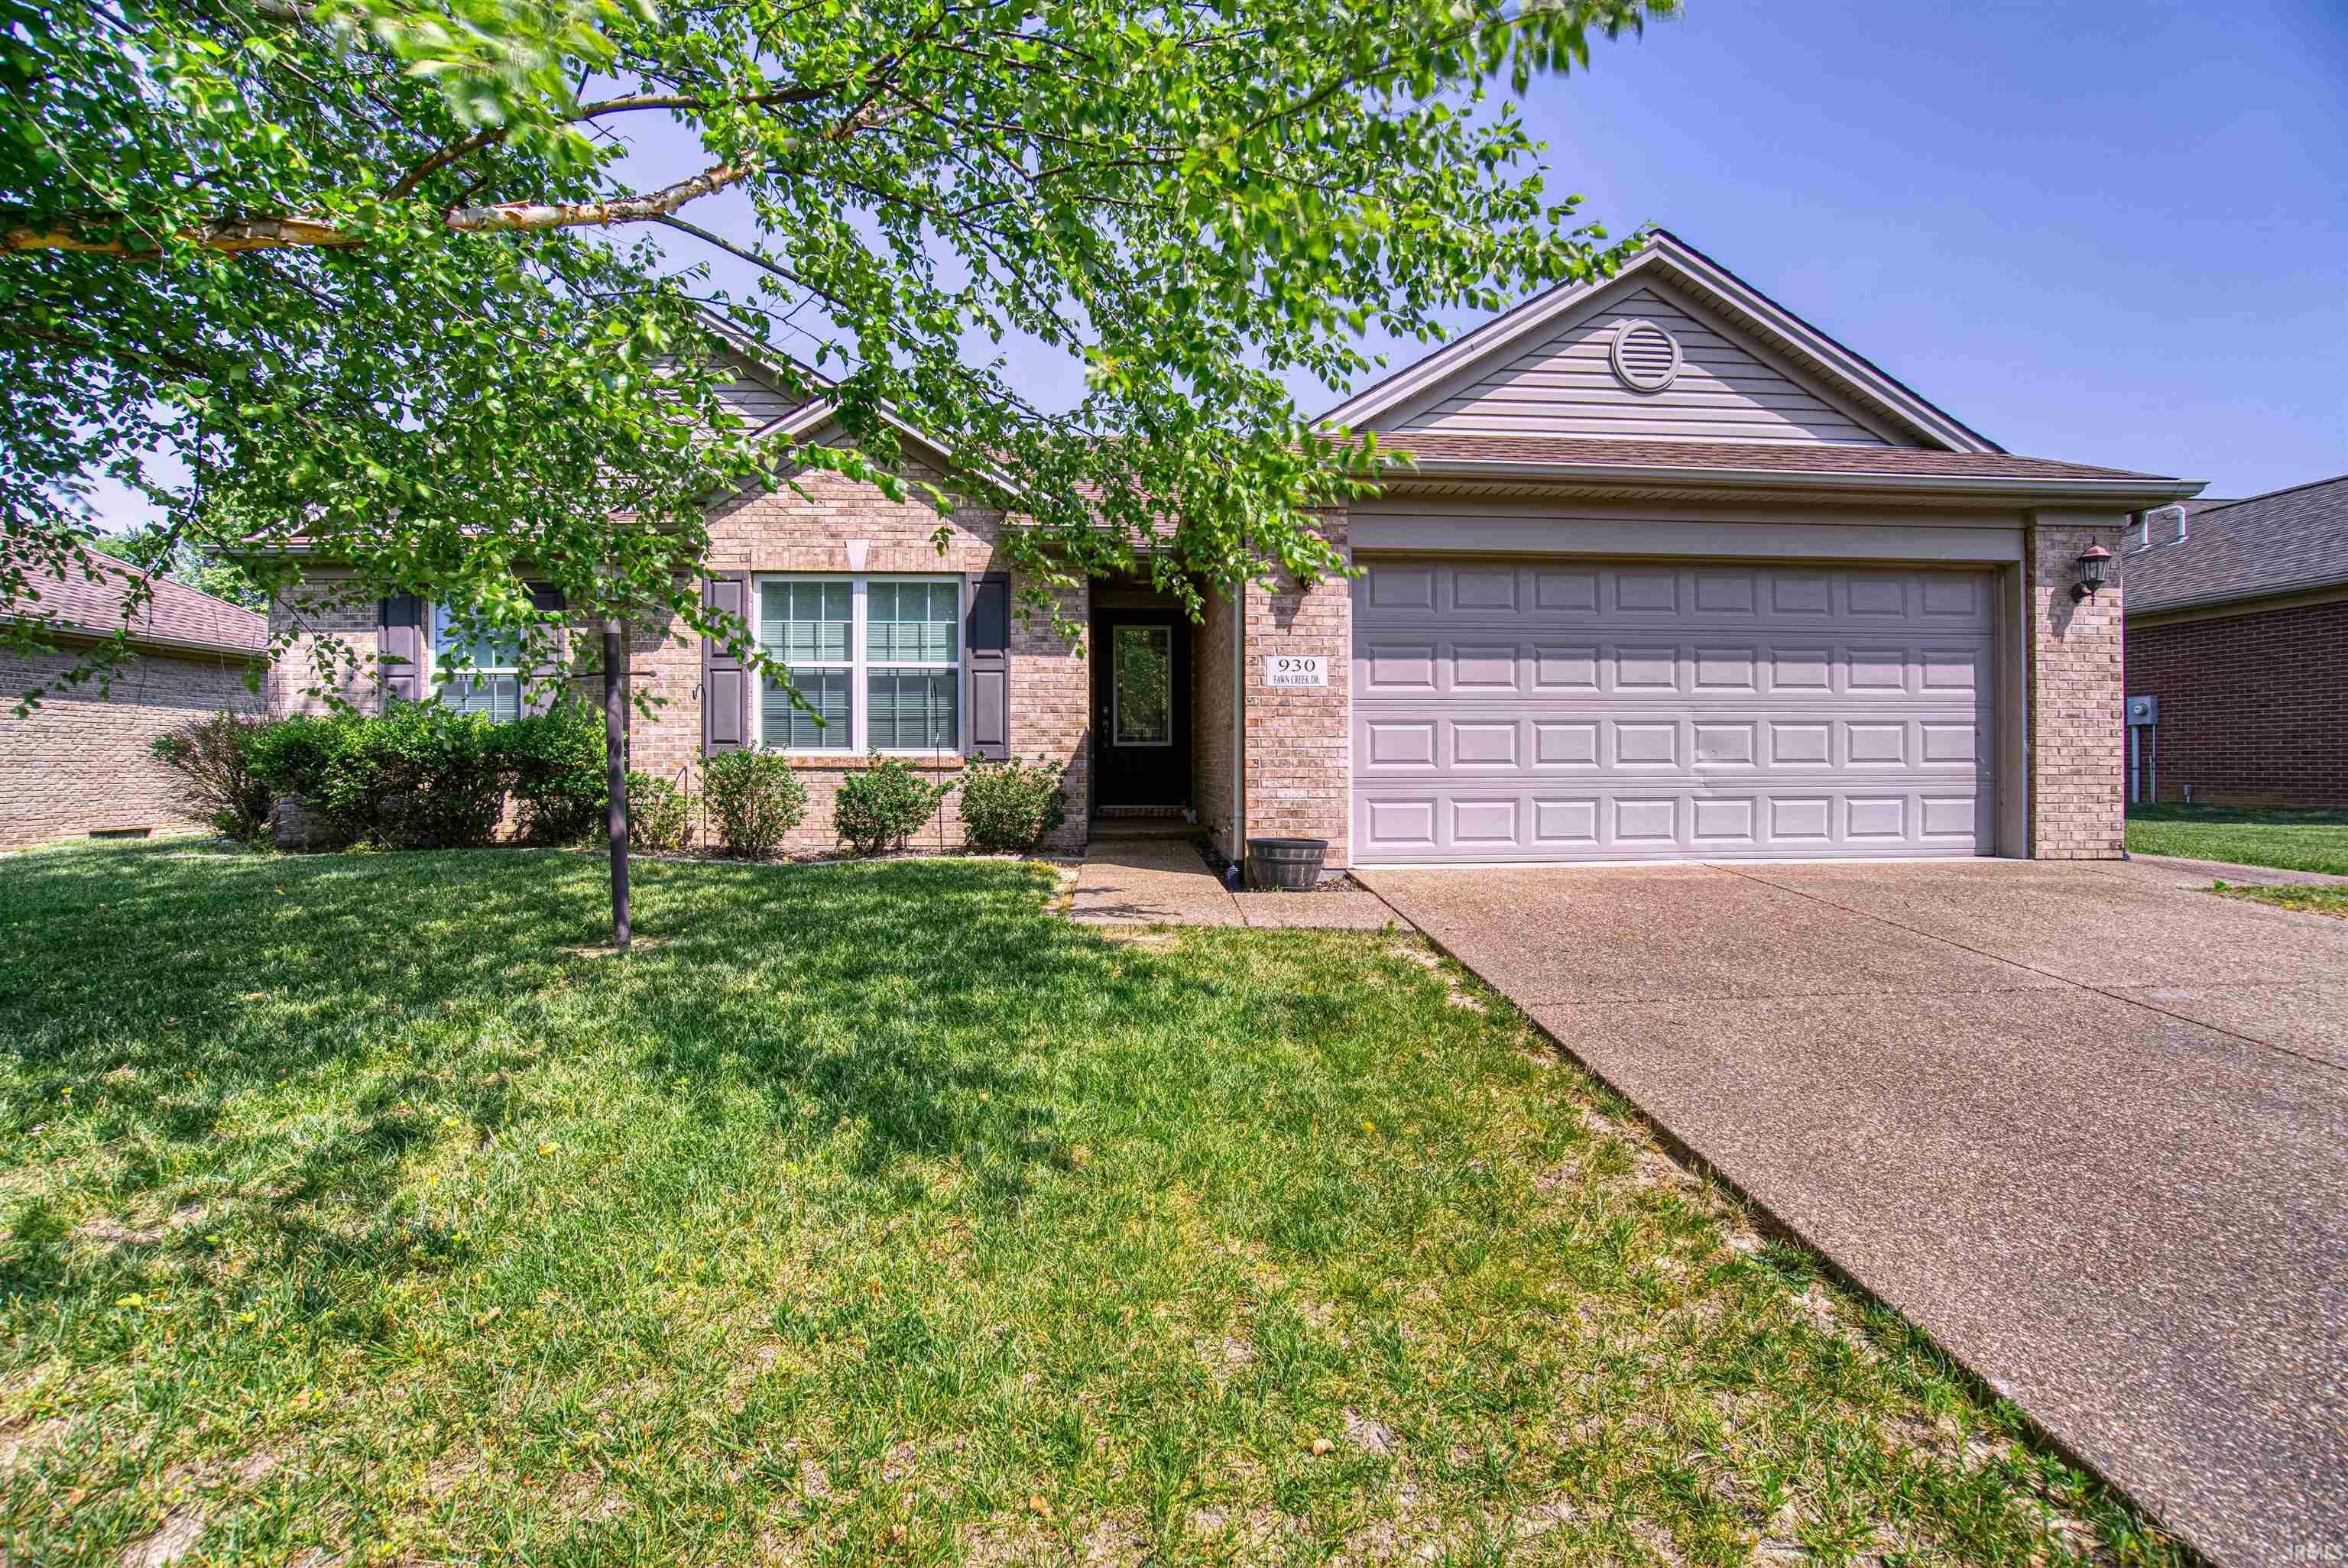 930 Fawn Creek Drive  Evansville IN 47712 photo